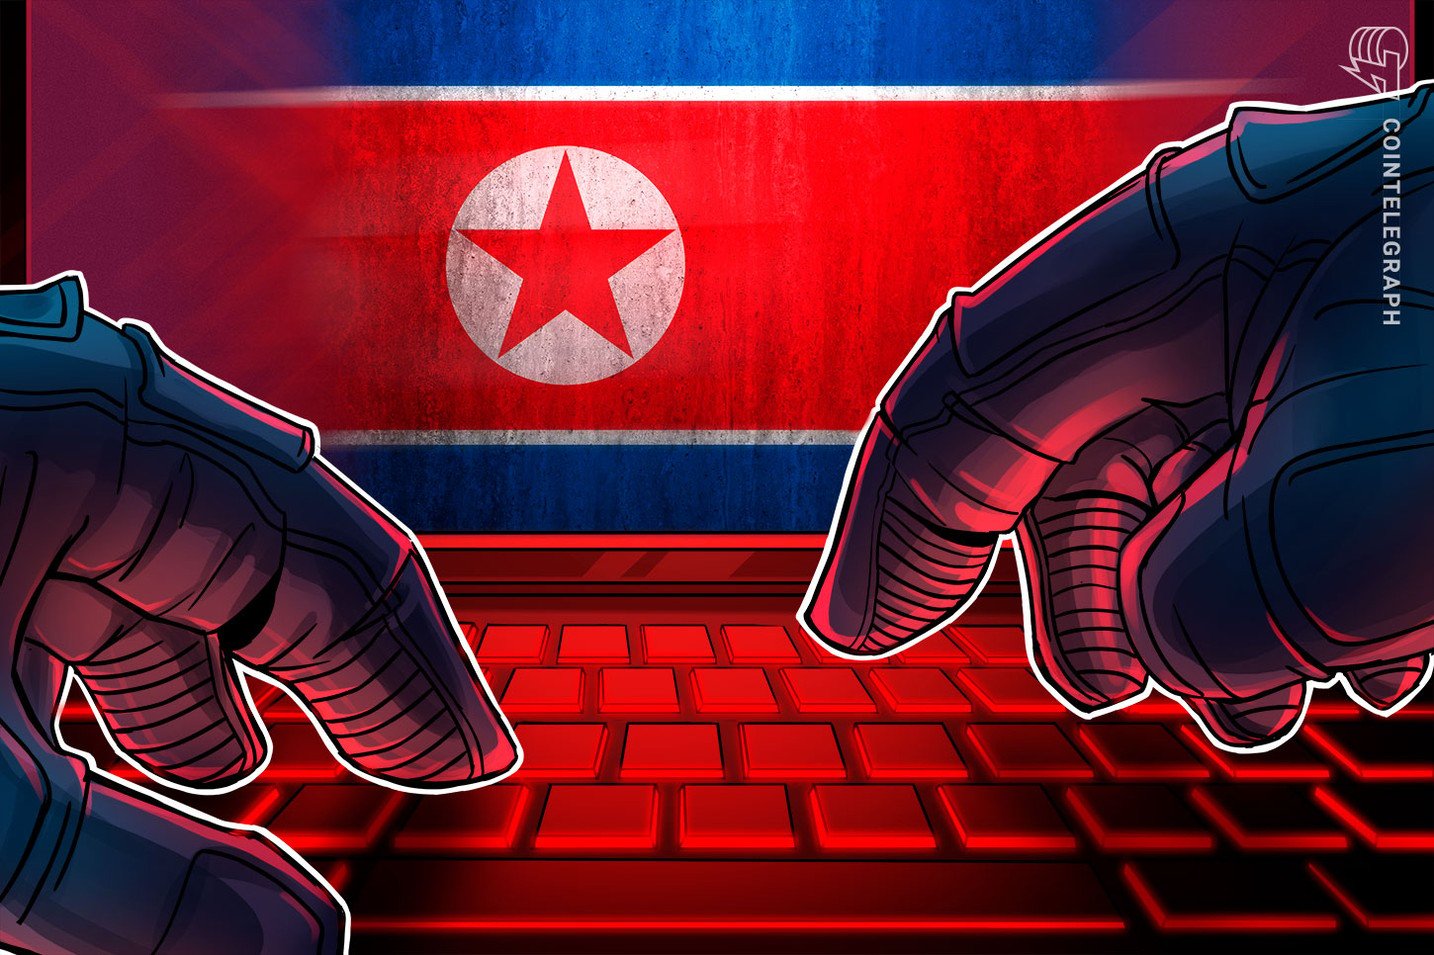 North Korean hackers have pilfered B of crypto over past six years: Report